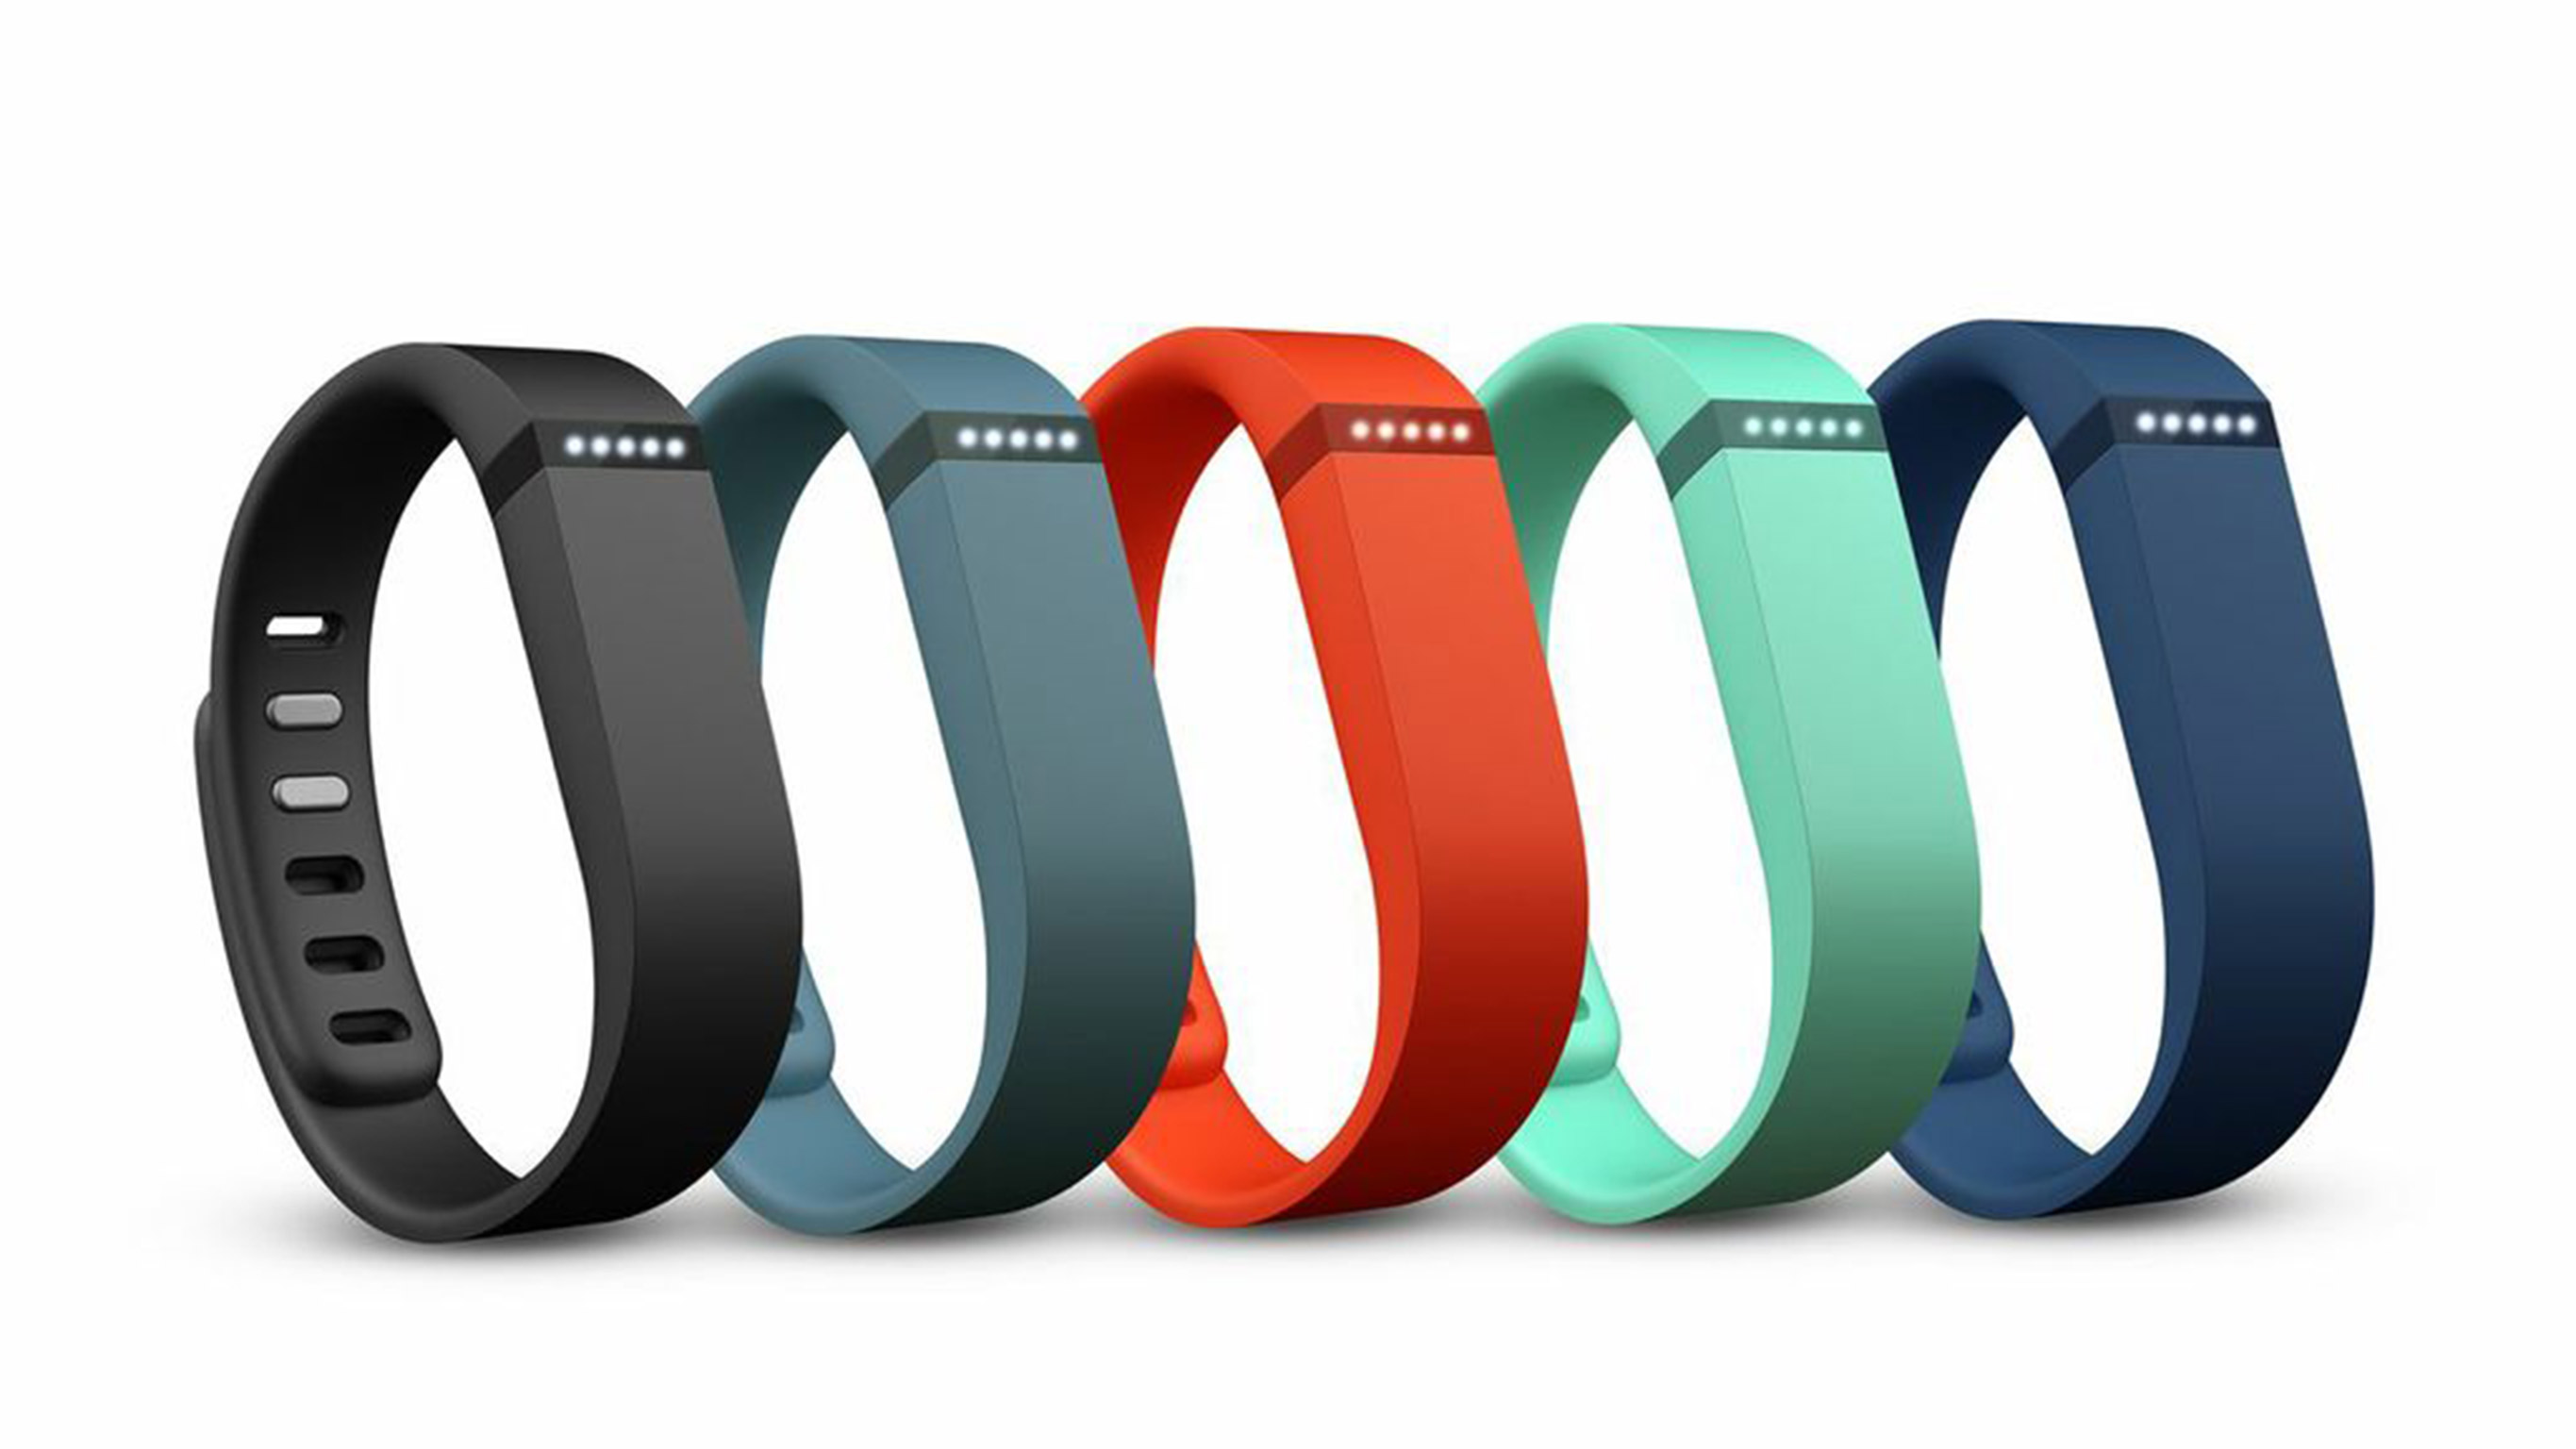 Fitbit products showcase